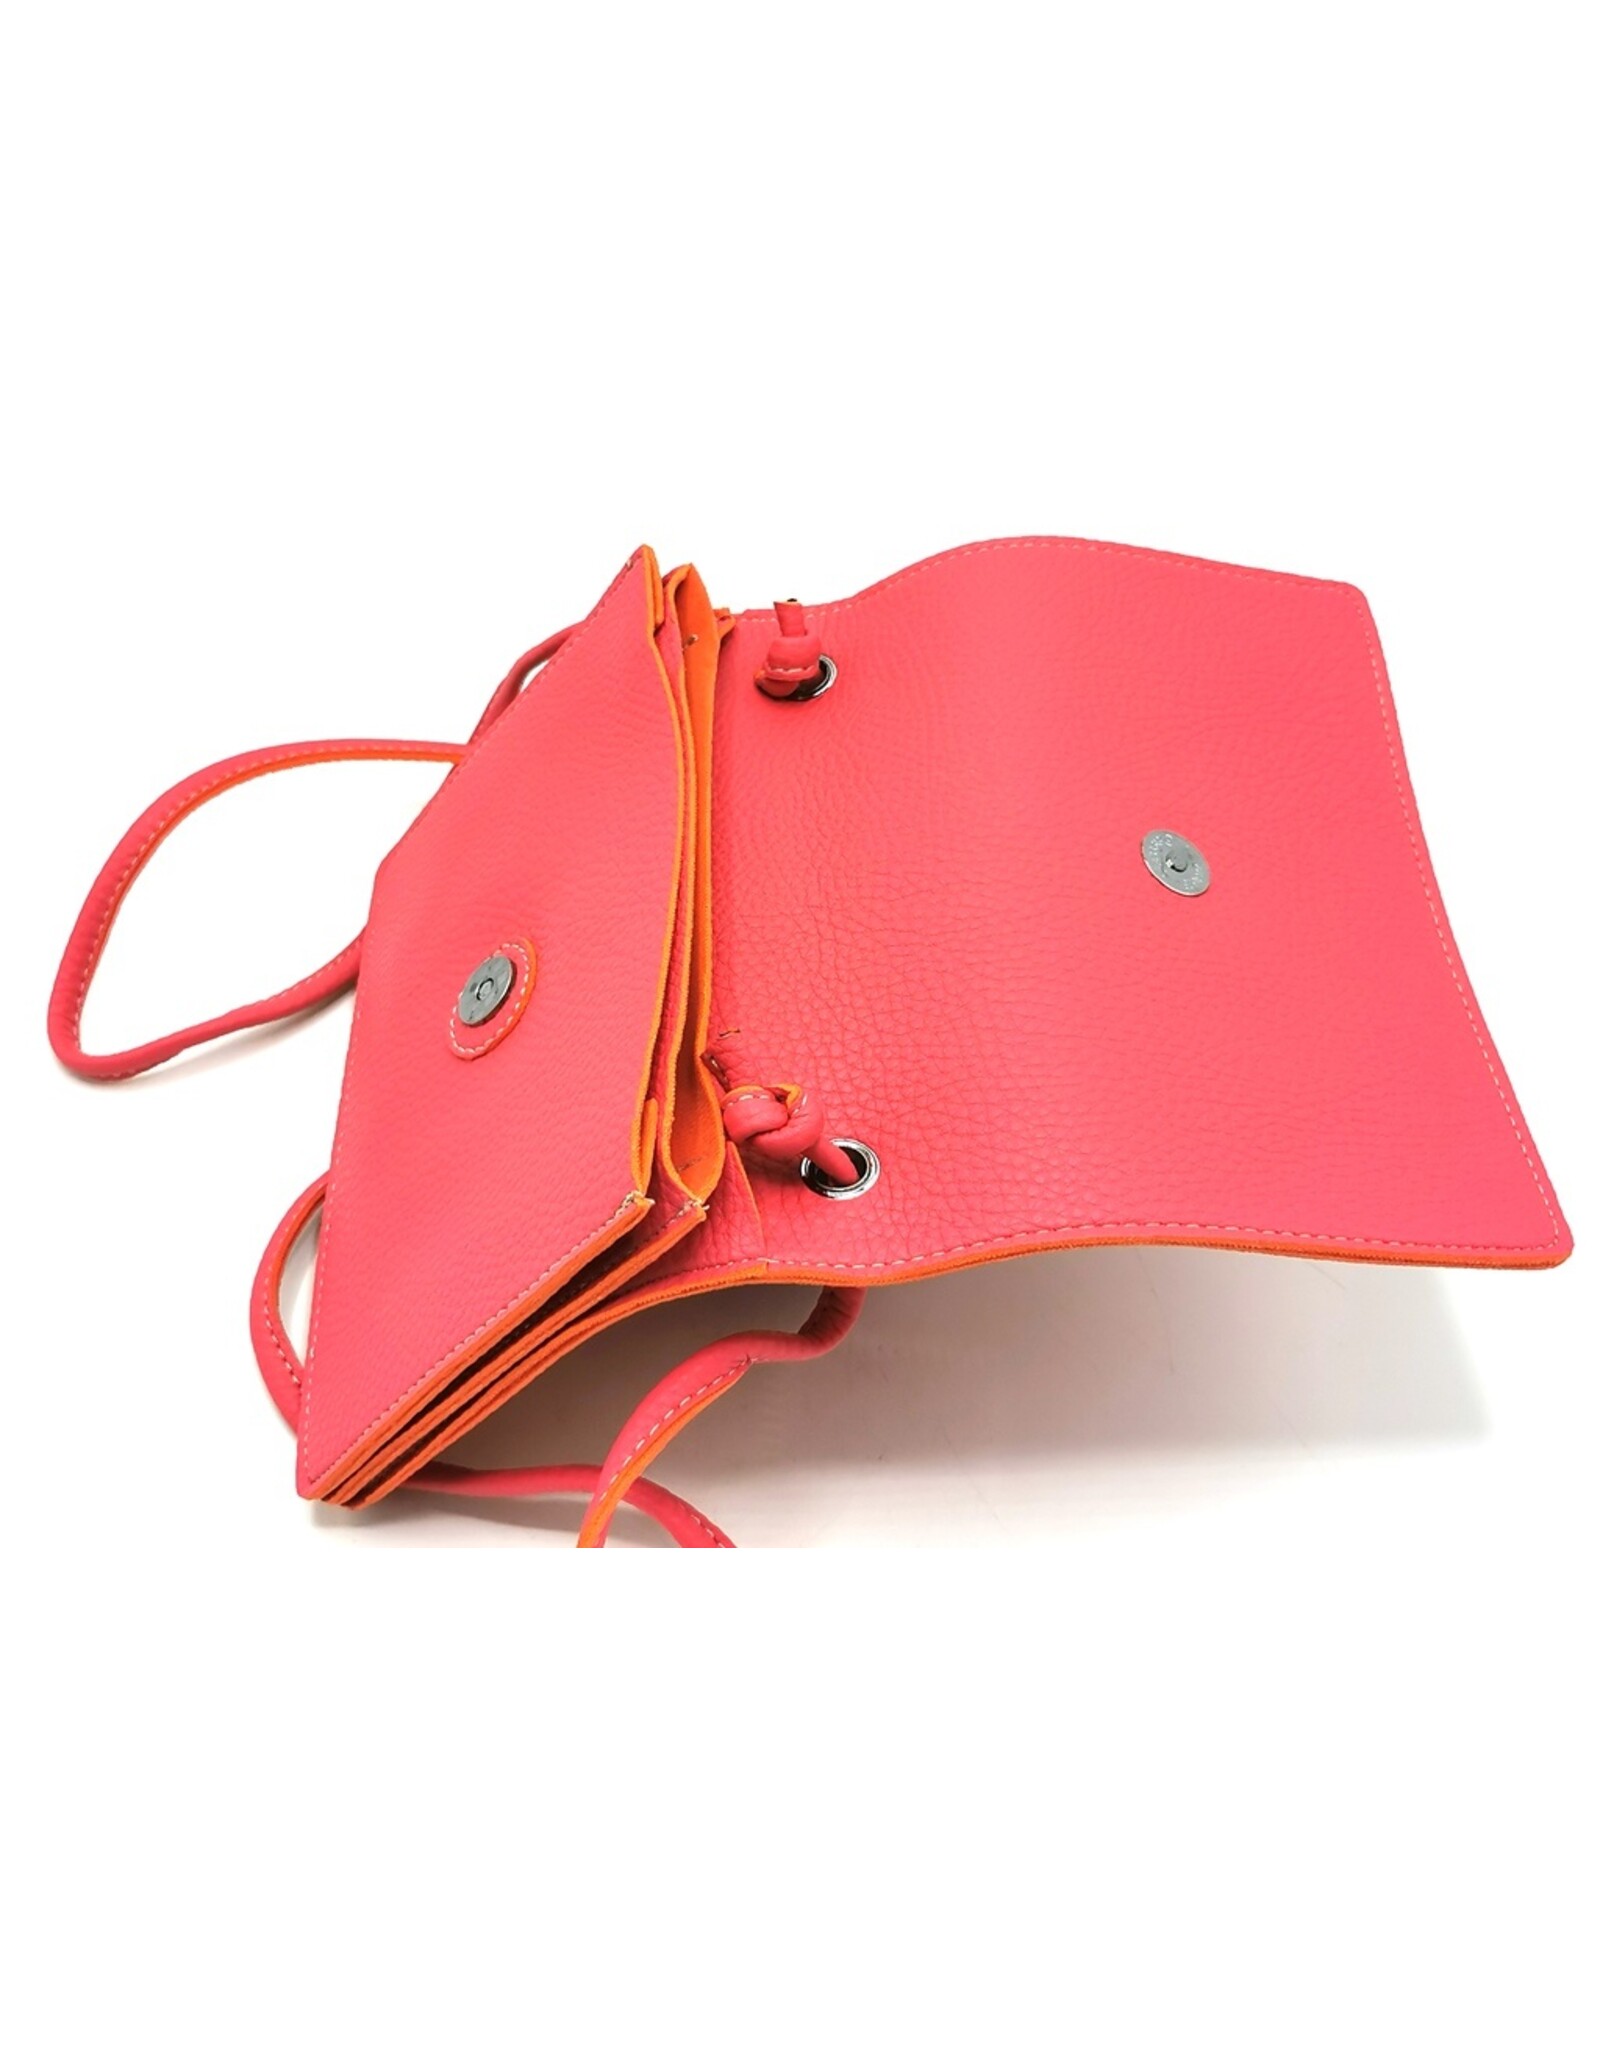 L&S Fashion bags - Shoulder bag with eyes